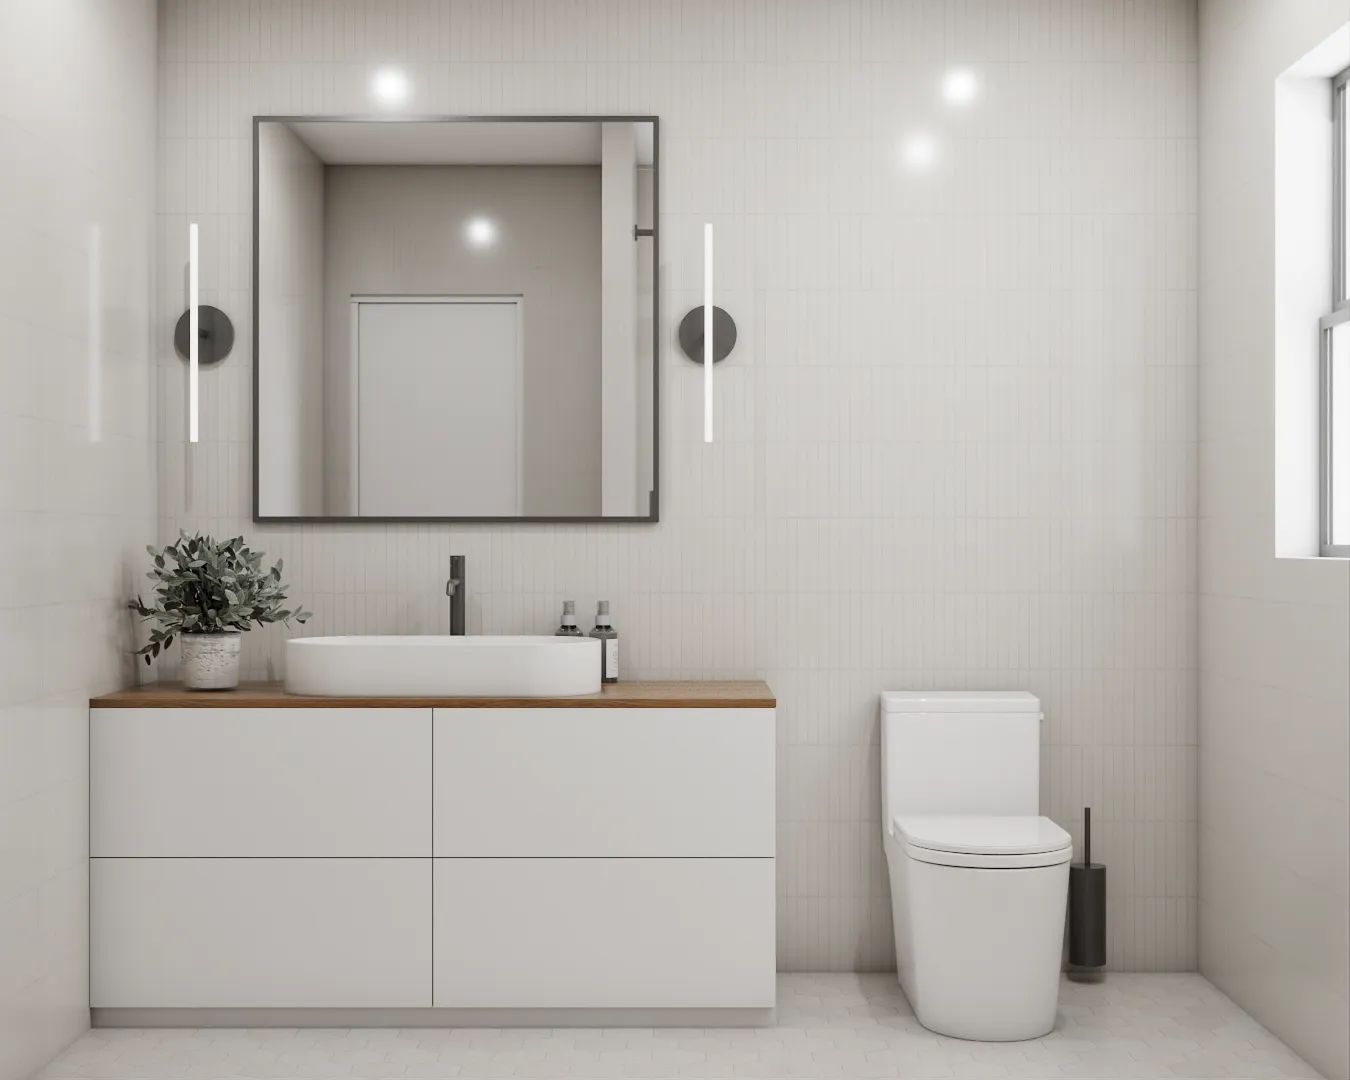 Modern bathroom featuring a white rectangular vanity, large mirror, and subtle wall sconces, enhancing a clean and minimalist aesthetic. Design by Debora, an online interior design service.